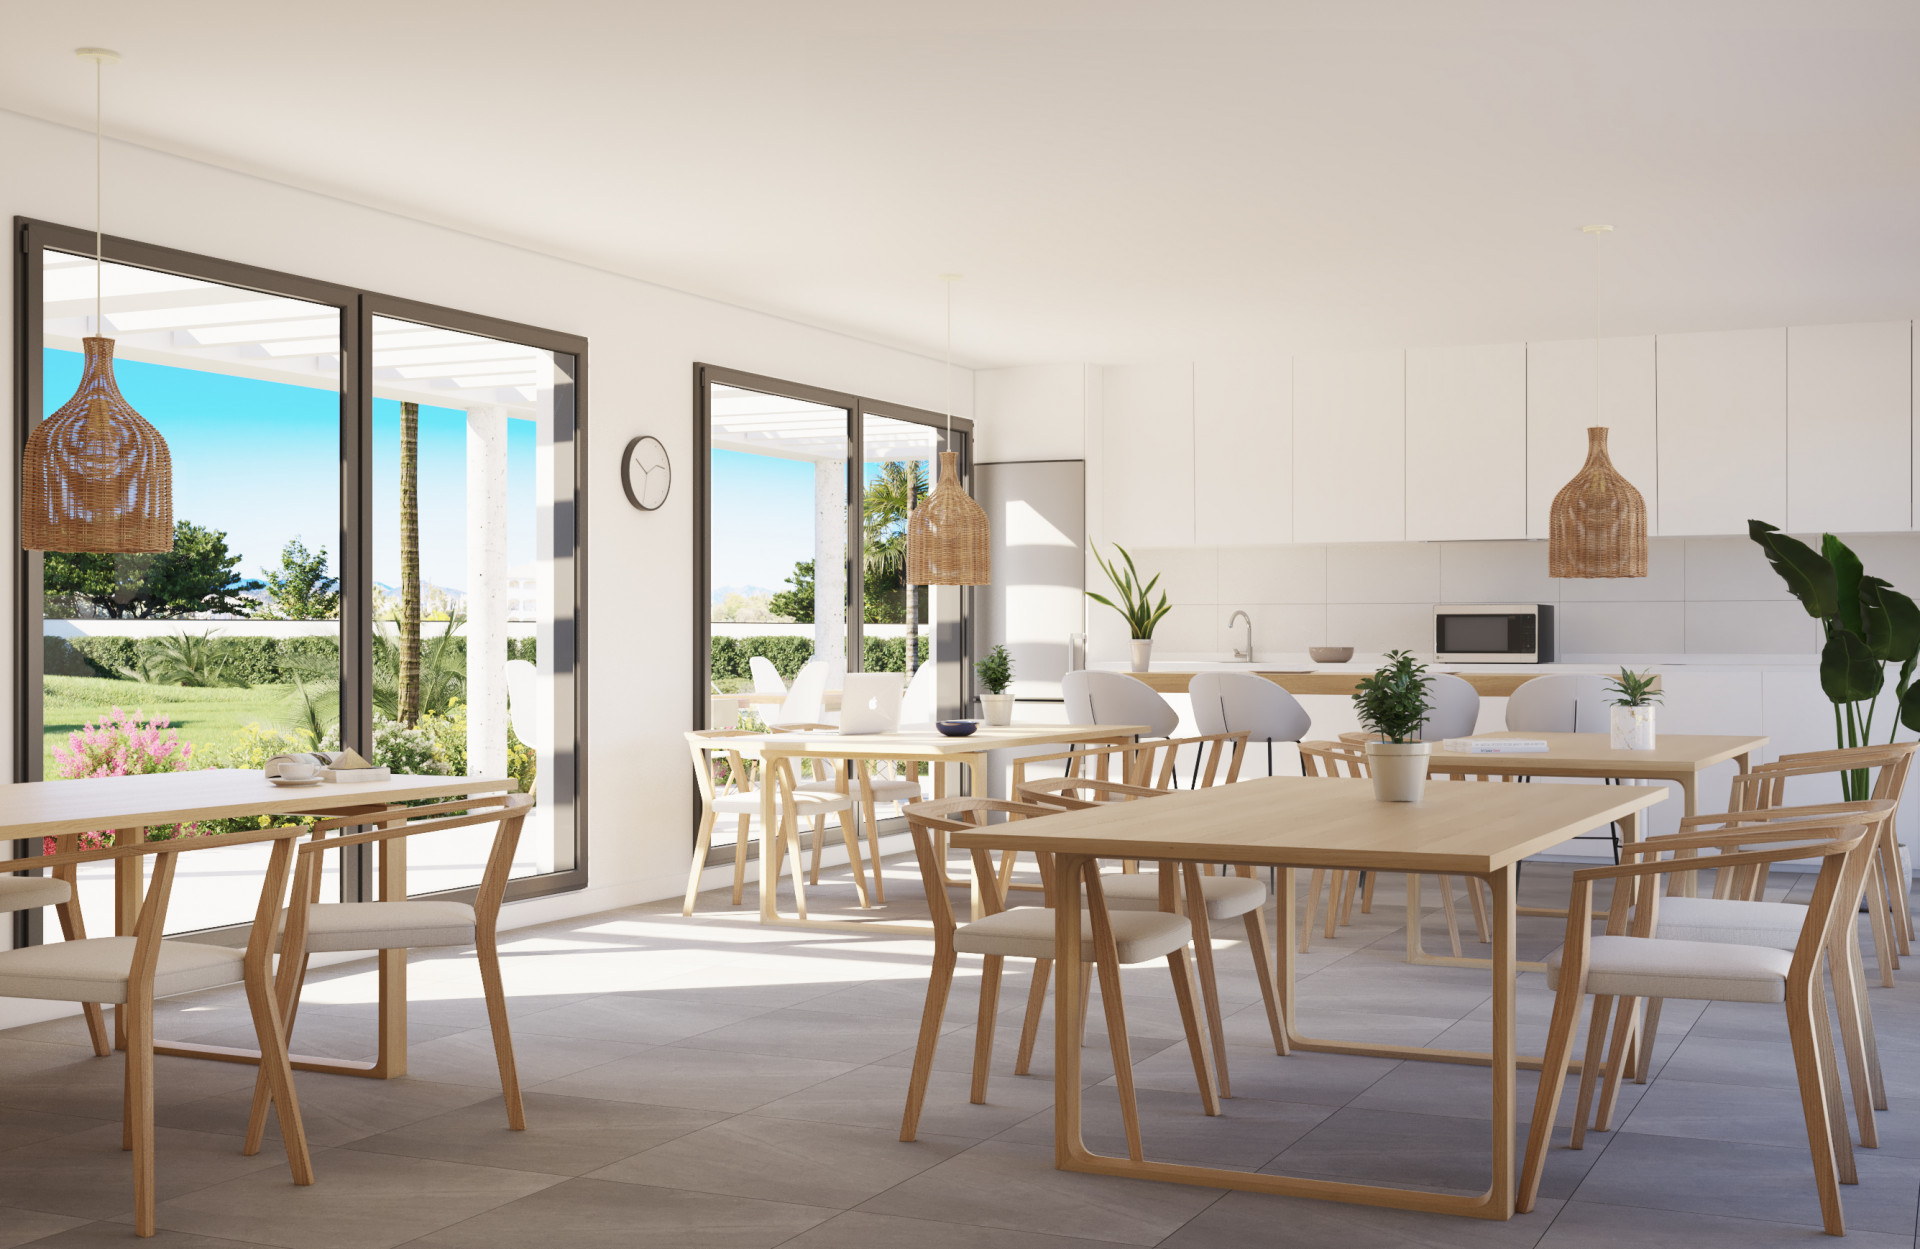 Aranya Estepona: New residential complex consisting of flats and penthouses located in Estepona. | Image 5